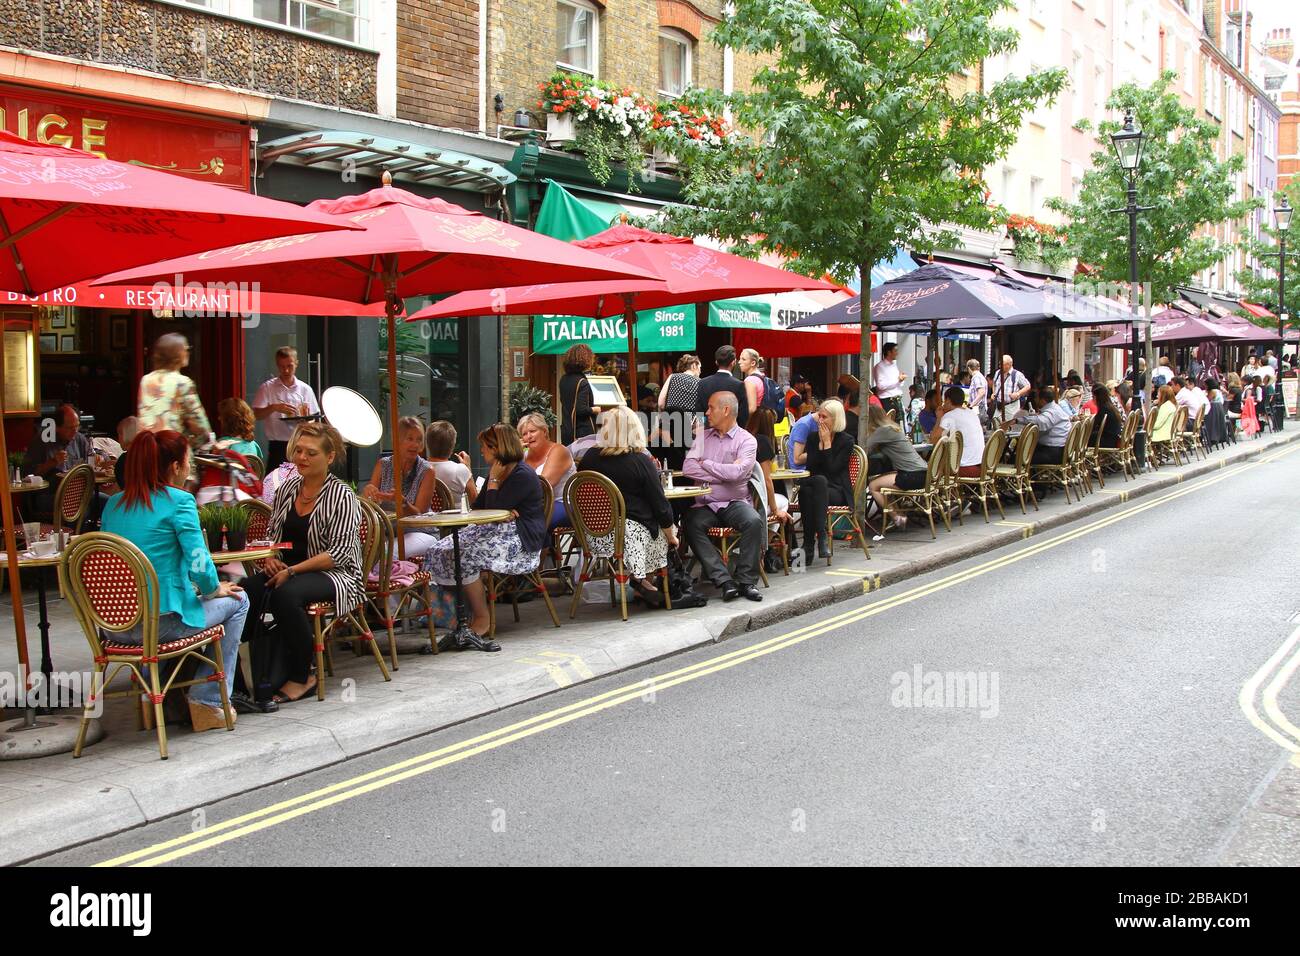 PEOPLE DINING OUTSIDE ON THE DESIGNATED AREA FOR DRINKING, DINING AND SOCIALISING. RESTAURANT TRADE. RESTAURANT BUSINESS. TOURISM IN LONDON, UK. AUTHENTIC IMAGERY. STREET PHOTOGRAPHY. PEOPLE ENJOYING THEMSELVES. SOCIAL LIFE.  HUMAN CONDITION. Stock Photo